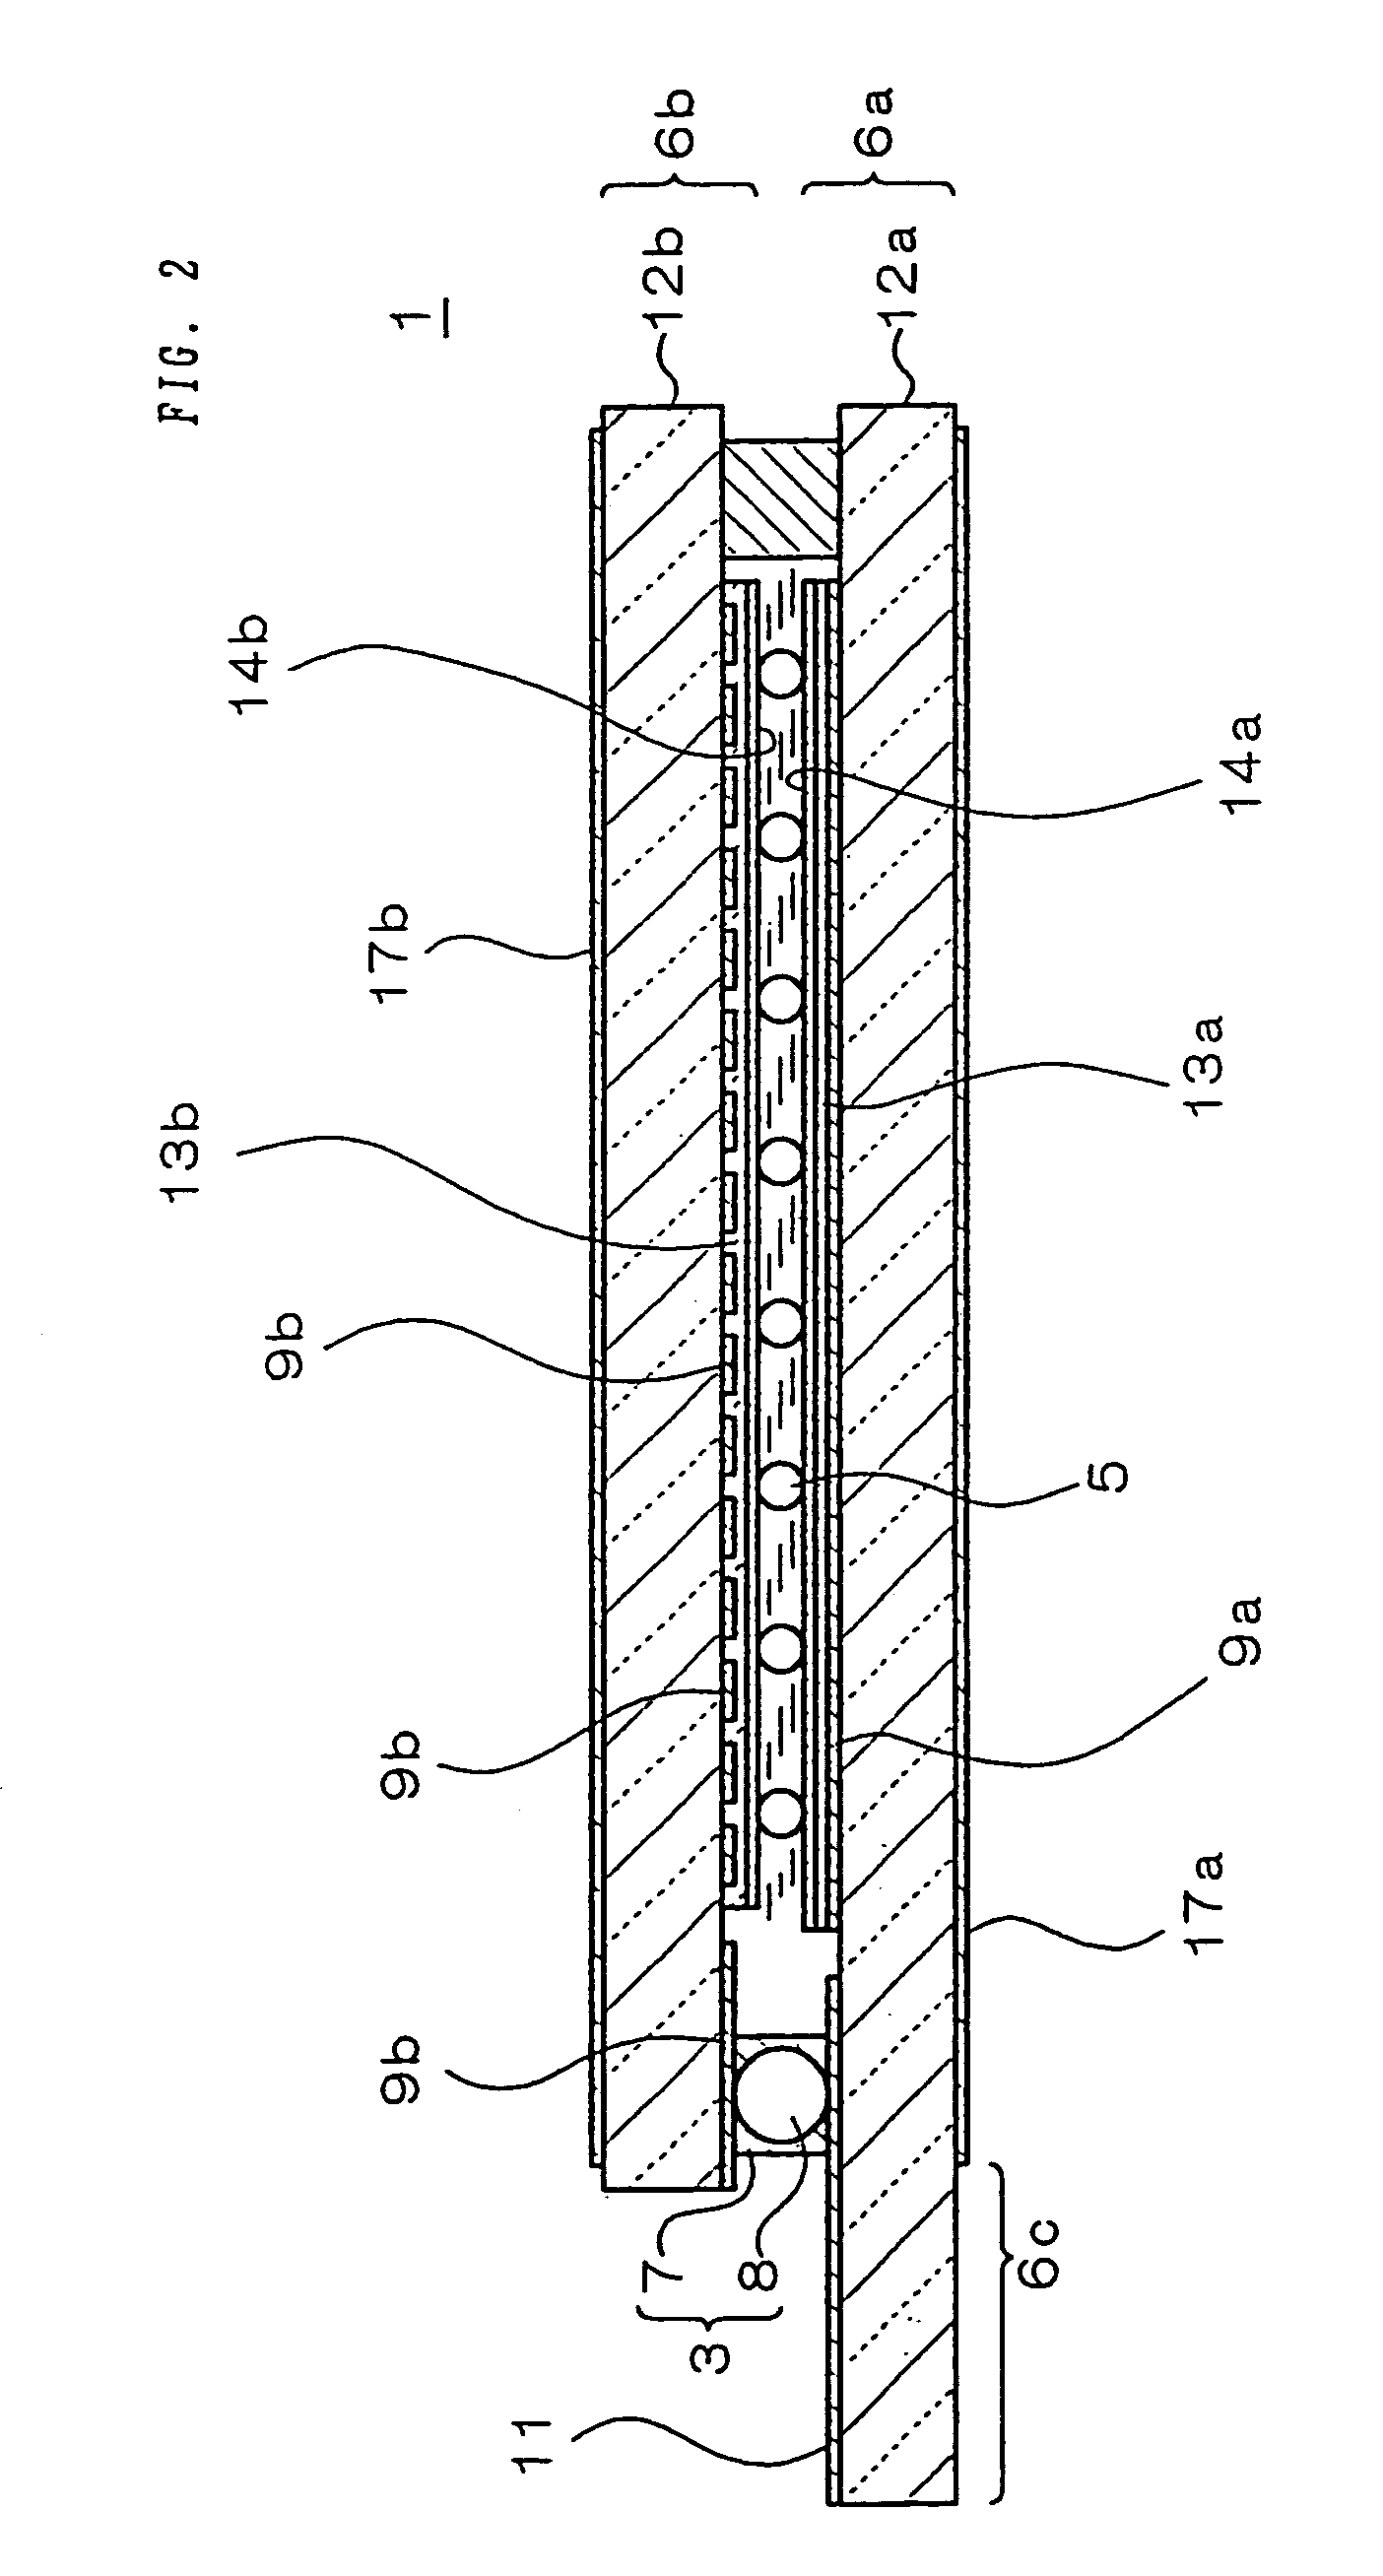 LCD and method of manufacture thereof